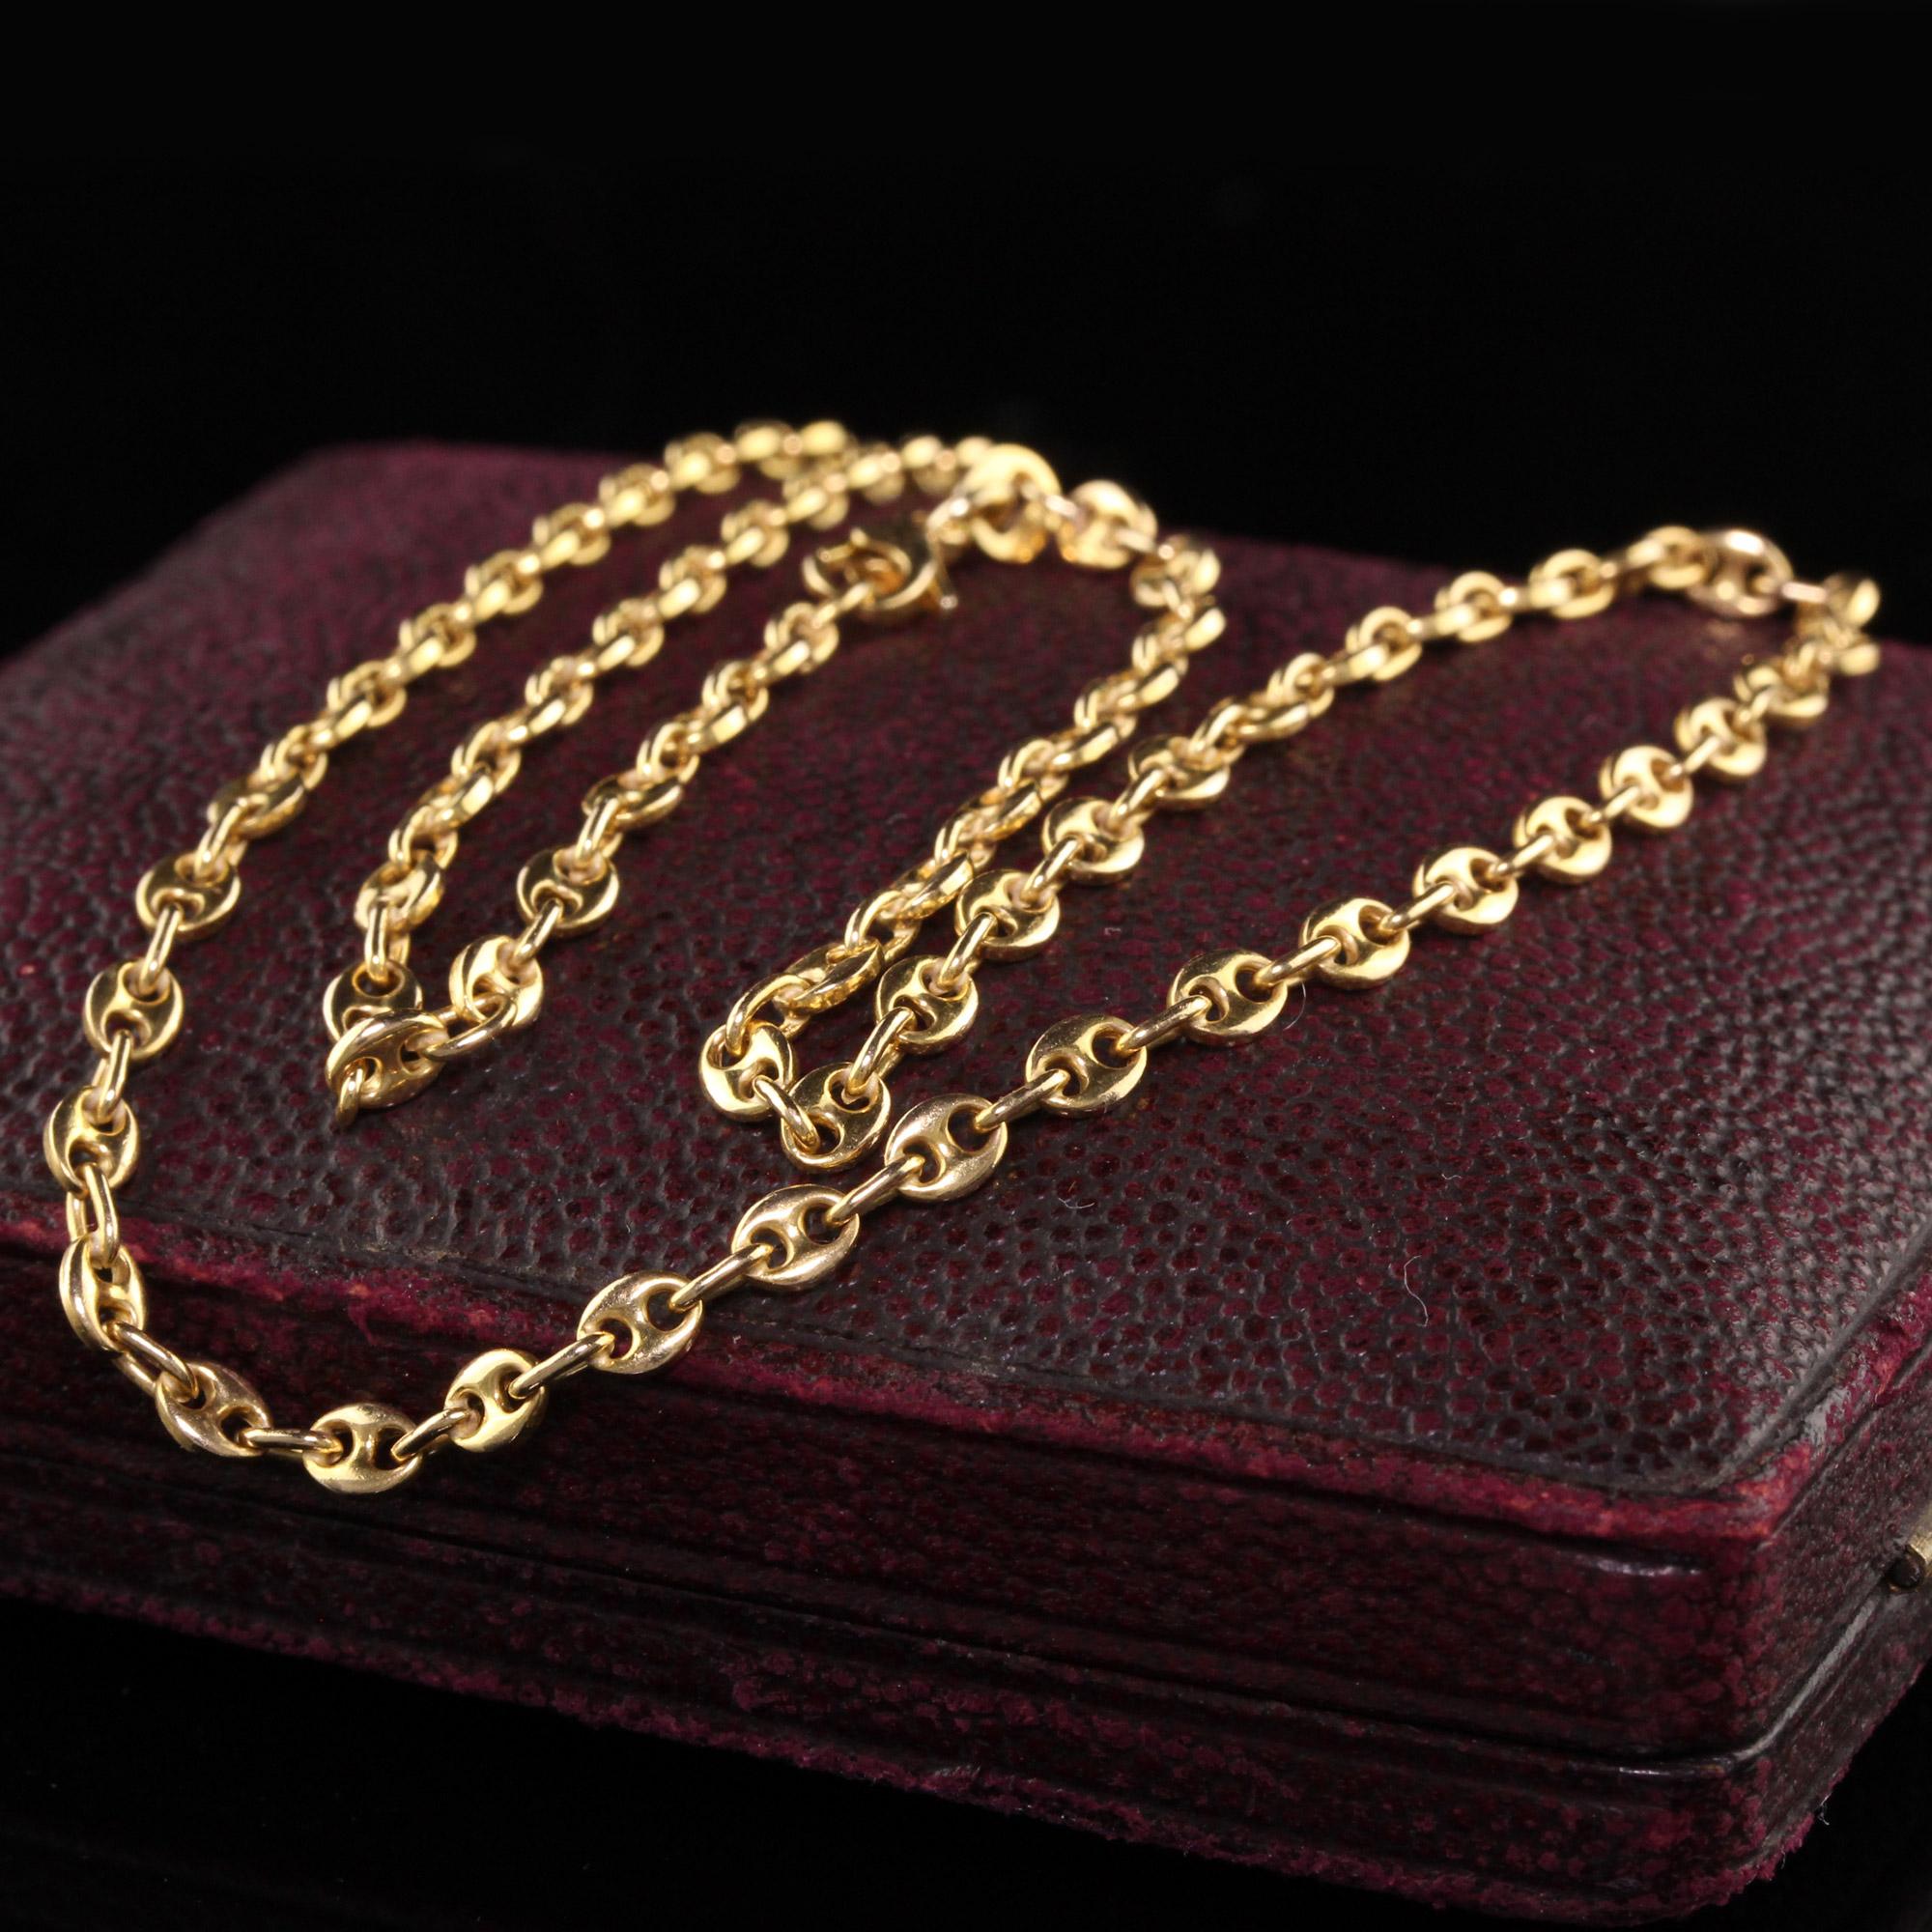 Beautiful Vintage Estate 18K Yellow Gold Gucci Style Link Necklace - 16 inches. This classic necklace is 16 inches long and in great condition.

Item #N0061

Metal: 18K Yellow Gold

Weight: 9.4 Grams

Size: 16 inches long

Measurements: Chain